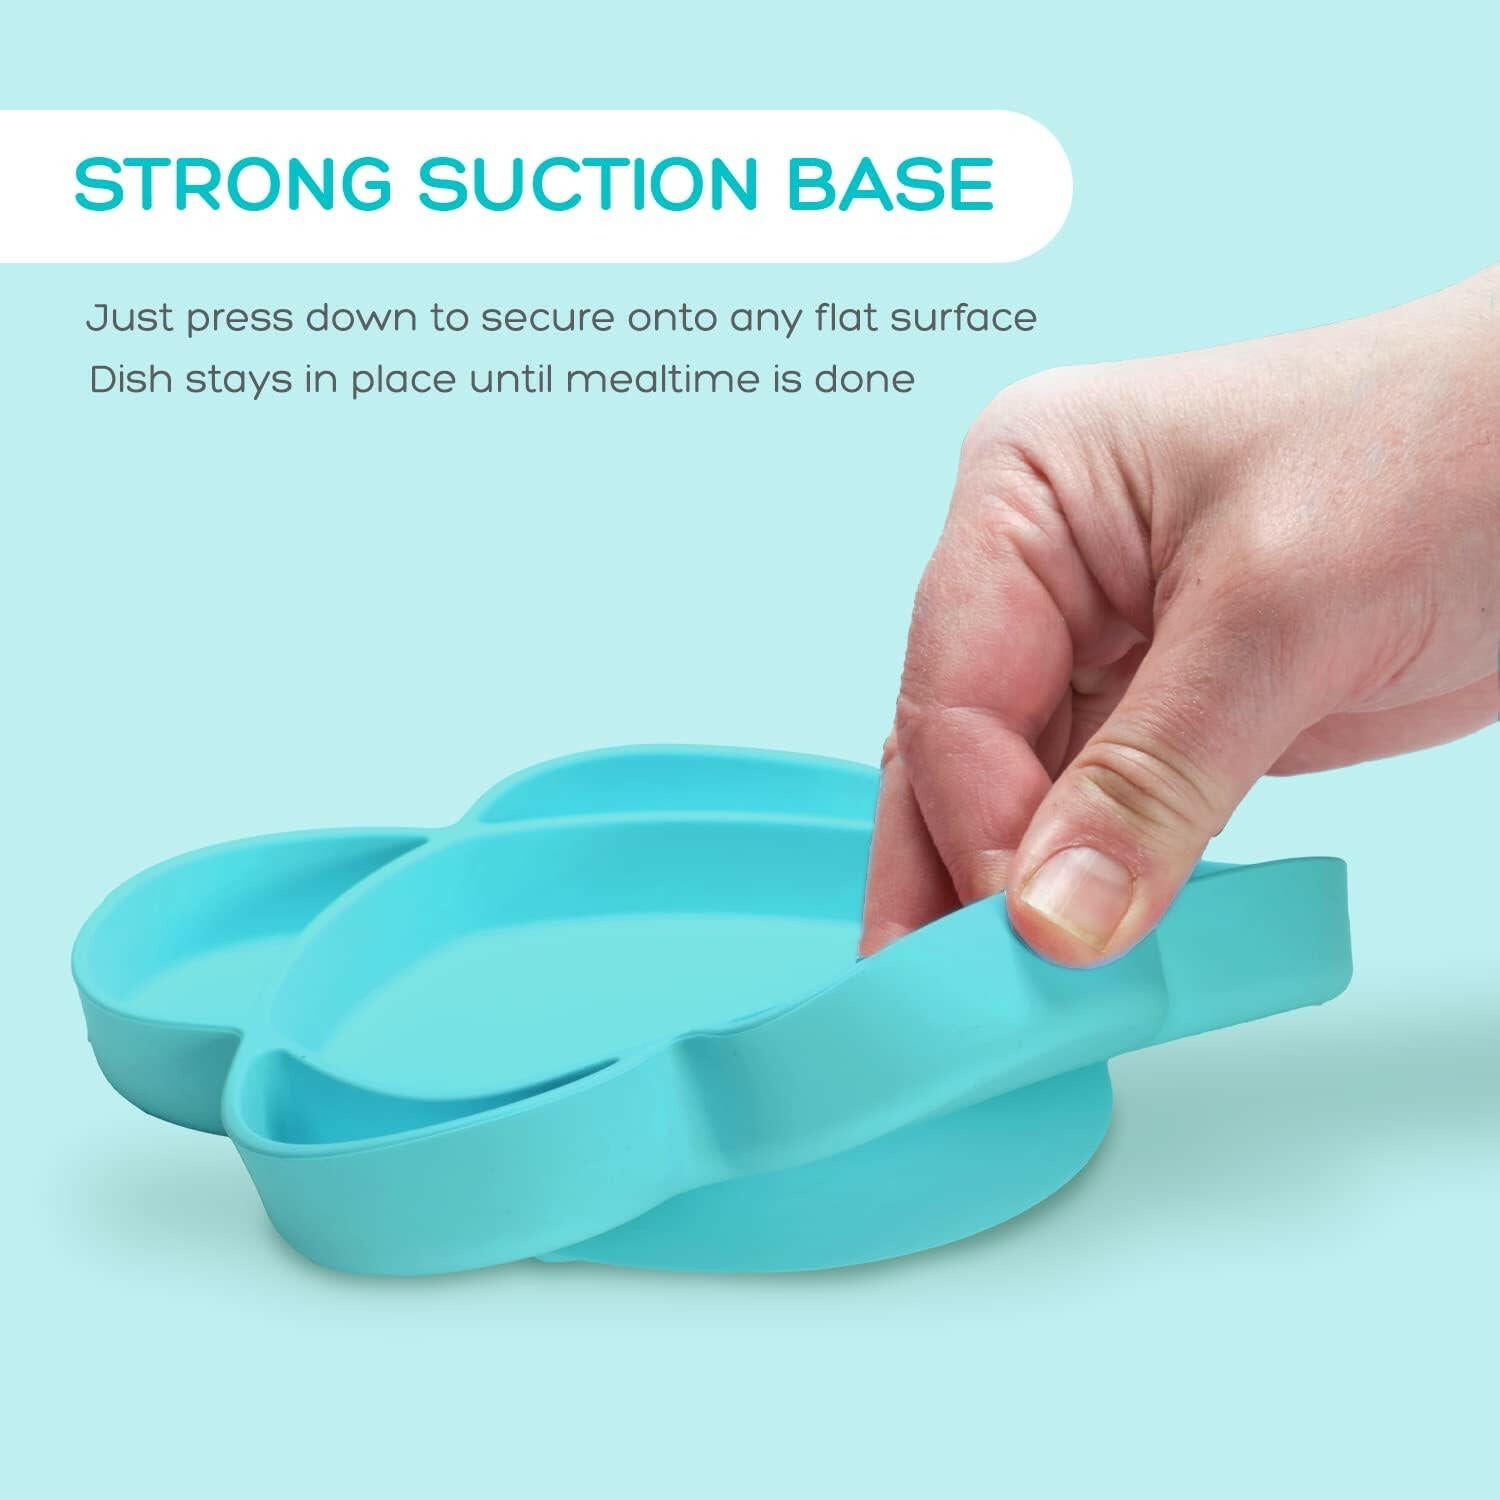 Grabease Silicone Suction Plate for Baby & Toddler Self-Feeding, 6-Section Dish With Stay-Put Grip, BPA and Phthalates-Free, Dishwasher and Microwave Safe